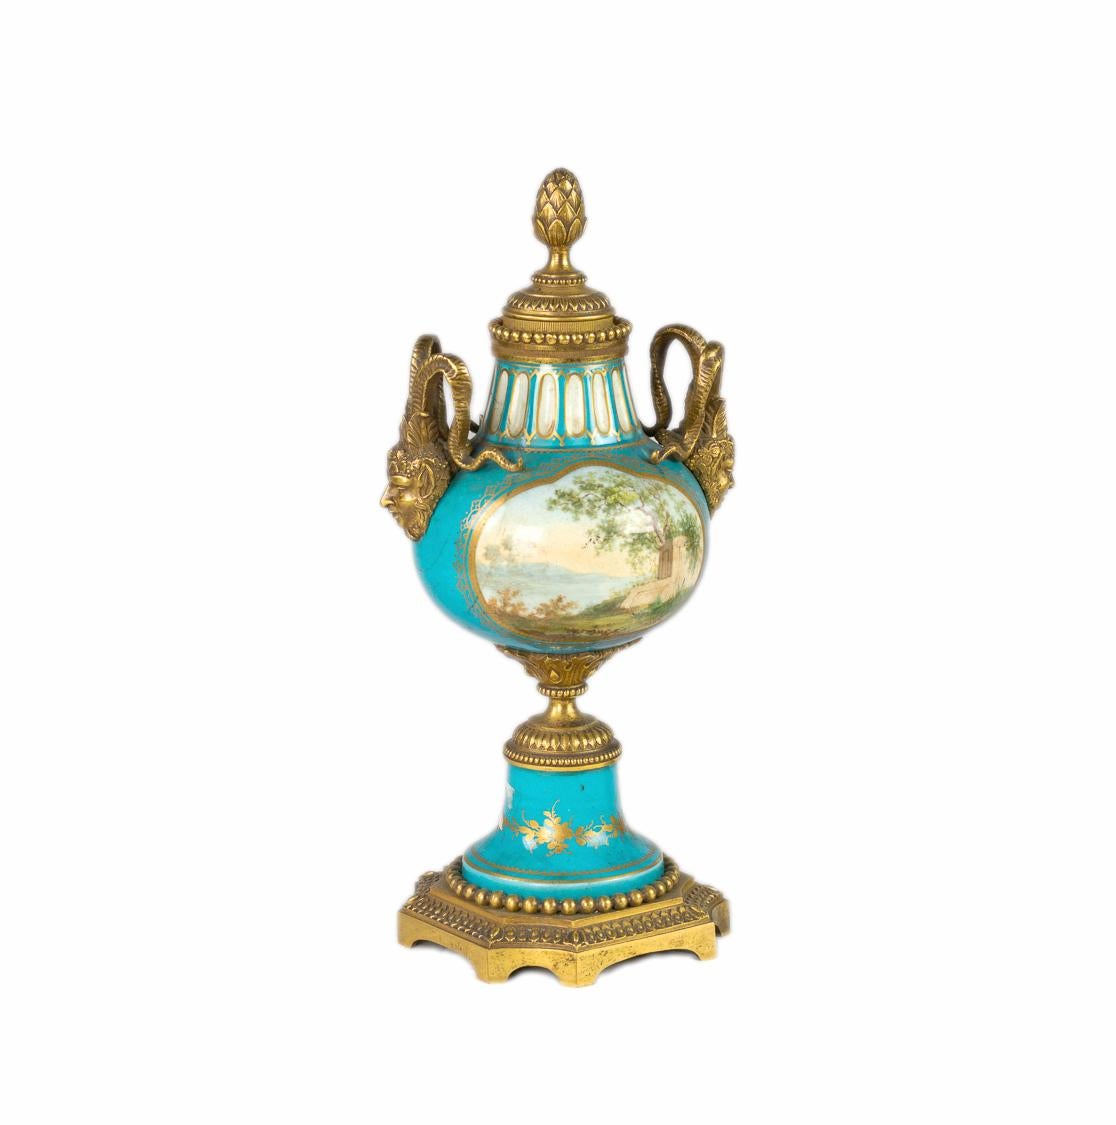 A very rare Ormolu Sèvres Porcelain Gilt Bronze Candlesticks Candelabra with a hand painted scene by François Boucher.

‘P . F . Boucher’ original mark on the side, also marked with a double L mark with V in the center and GL at the bottom. 

Dated